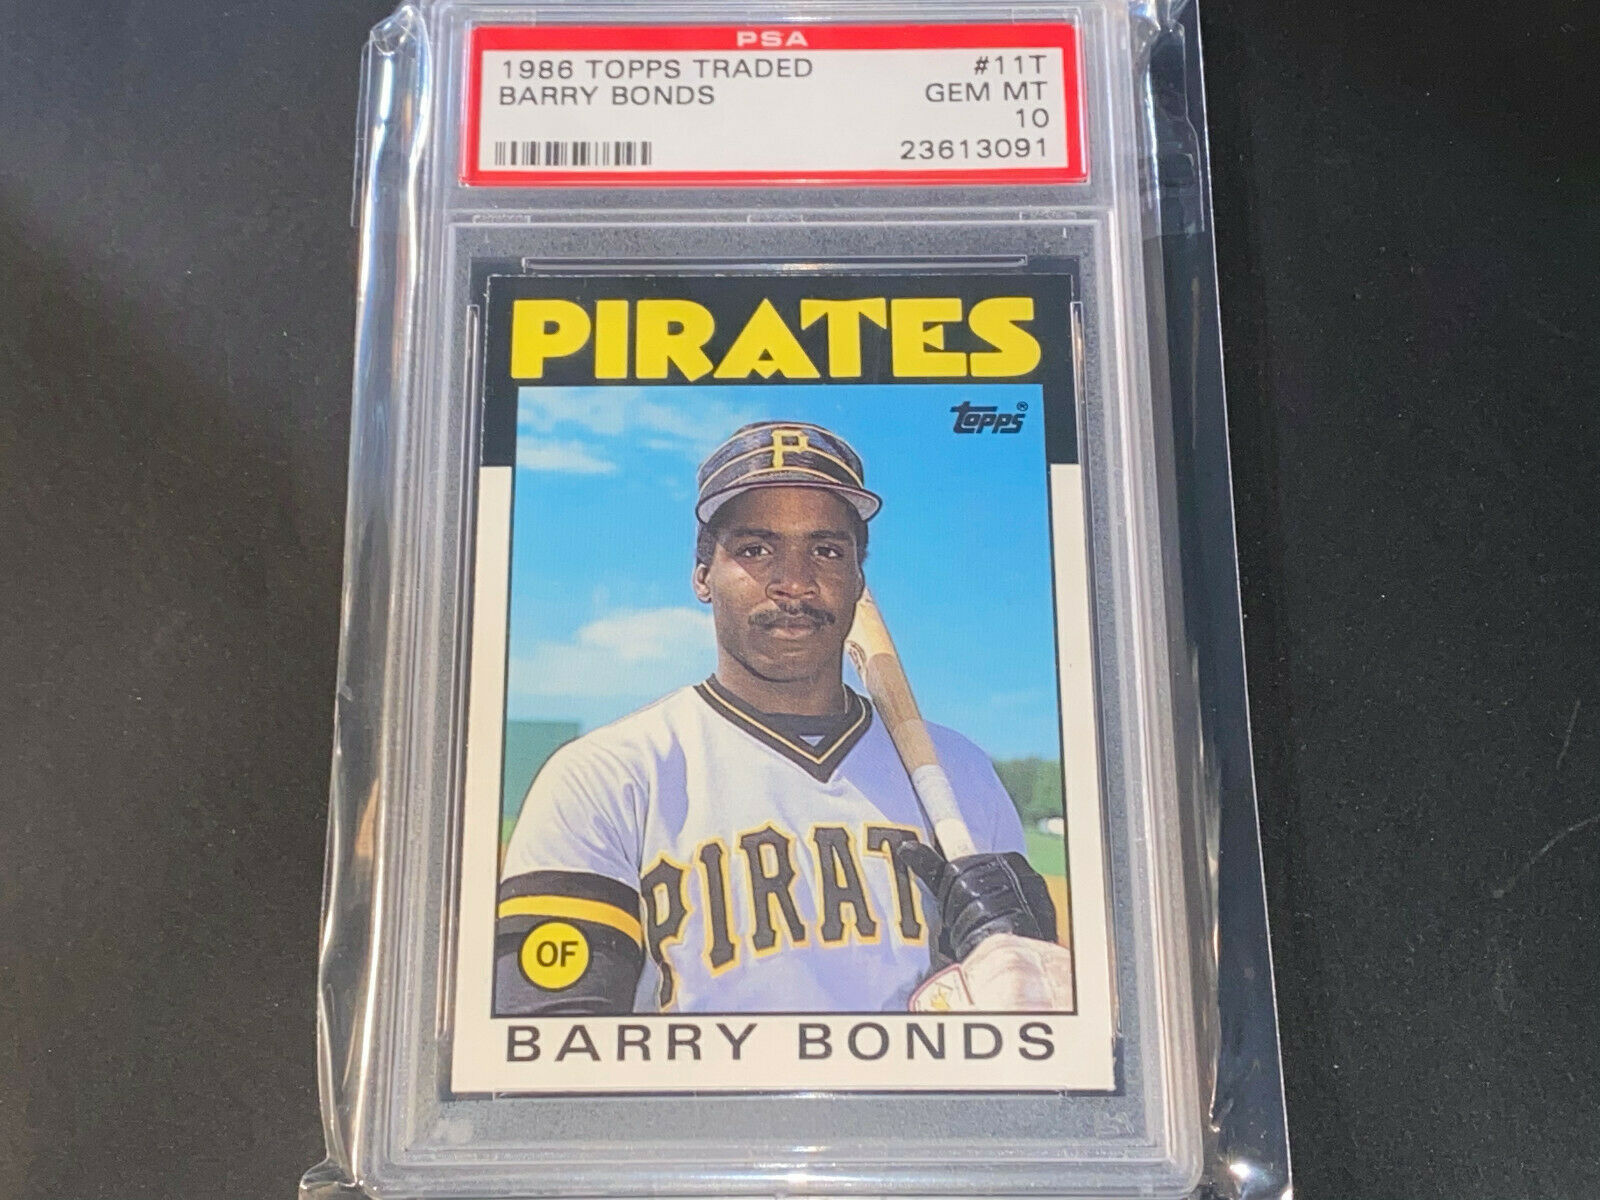 Barry Bonds Pittsburgh Pirates Giants 1986 Topps Rookie Card PSA 10 Mint d